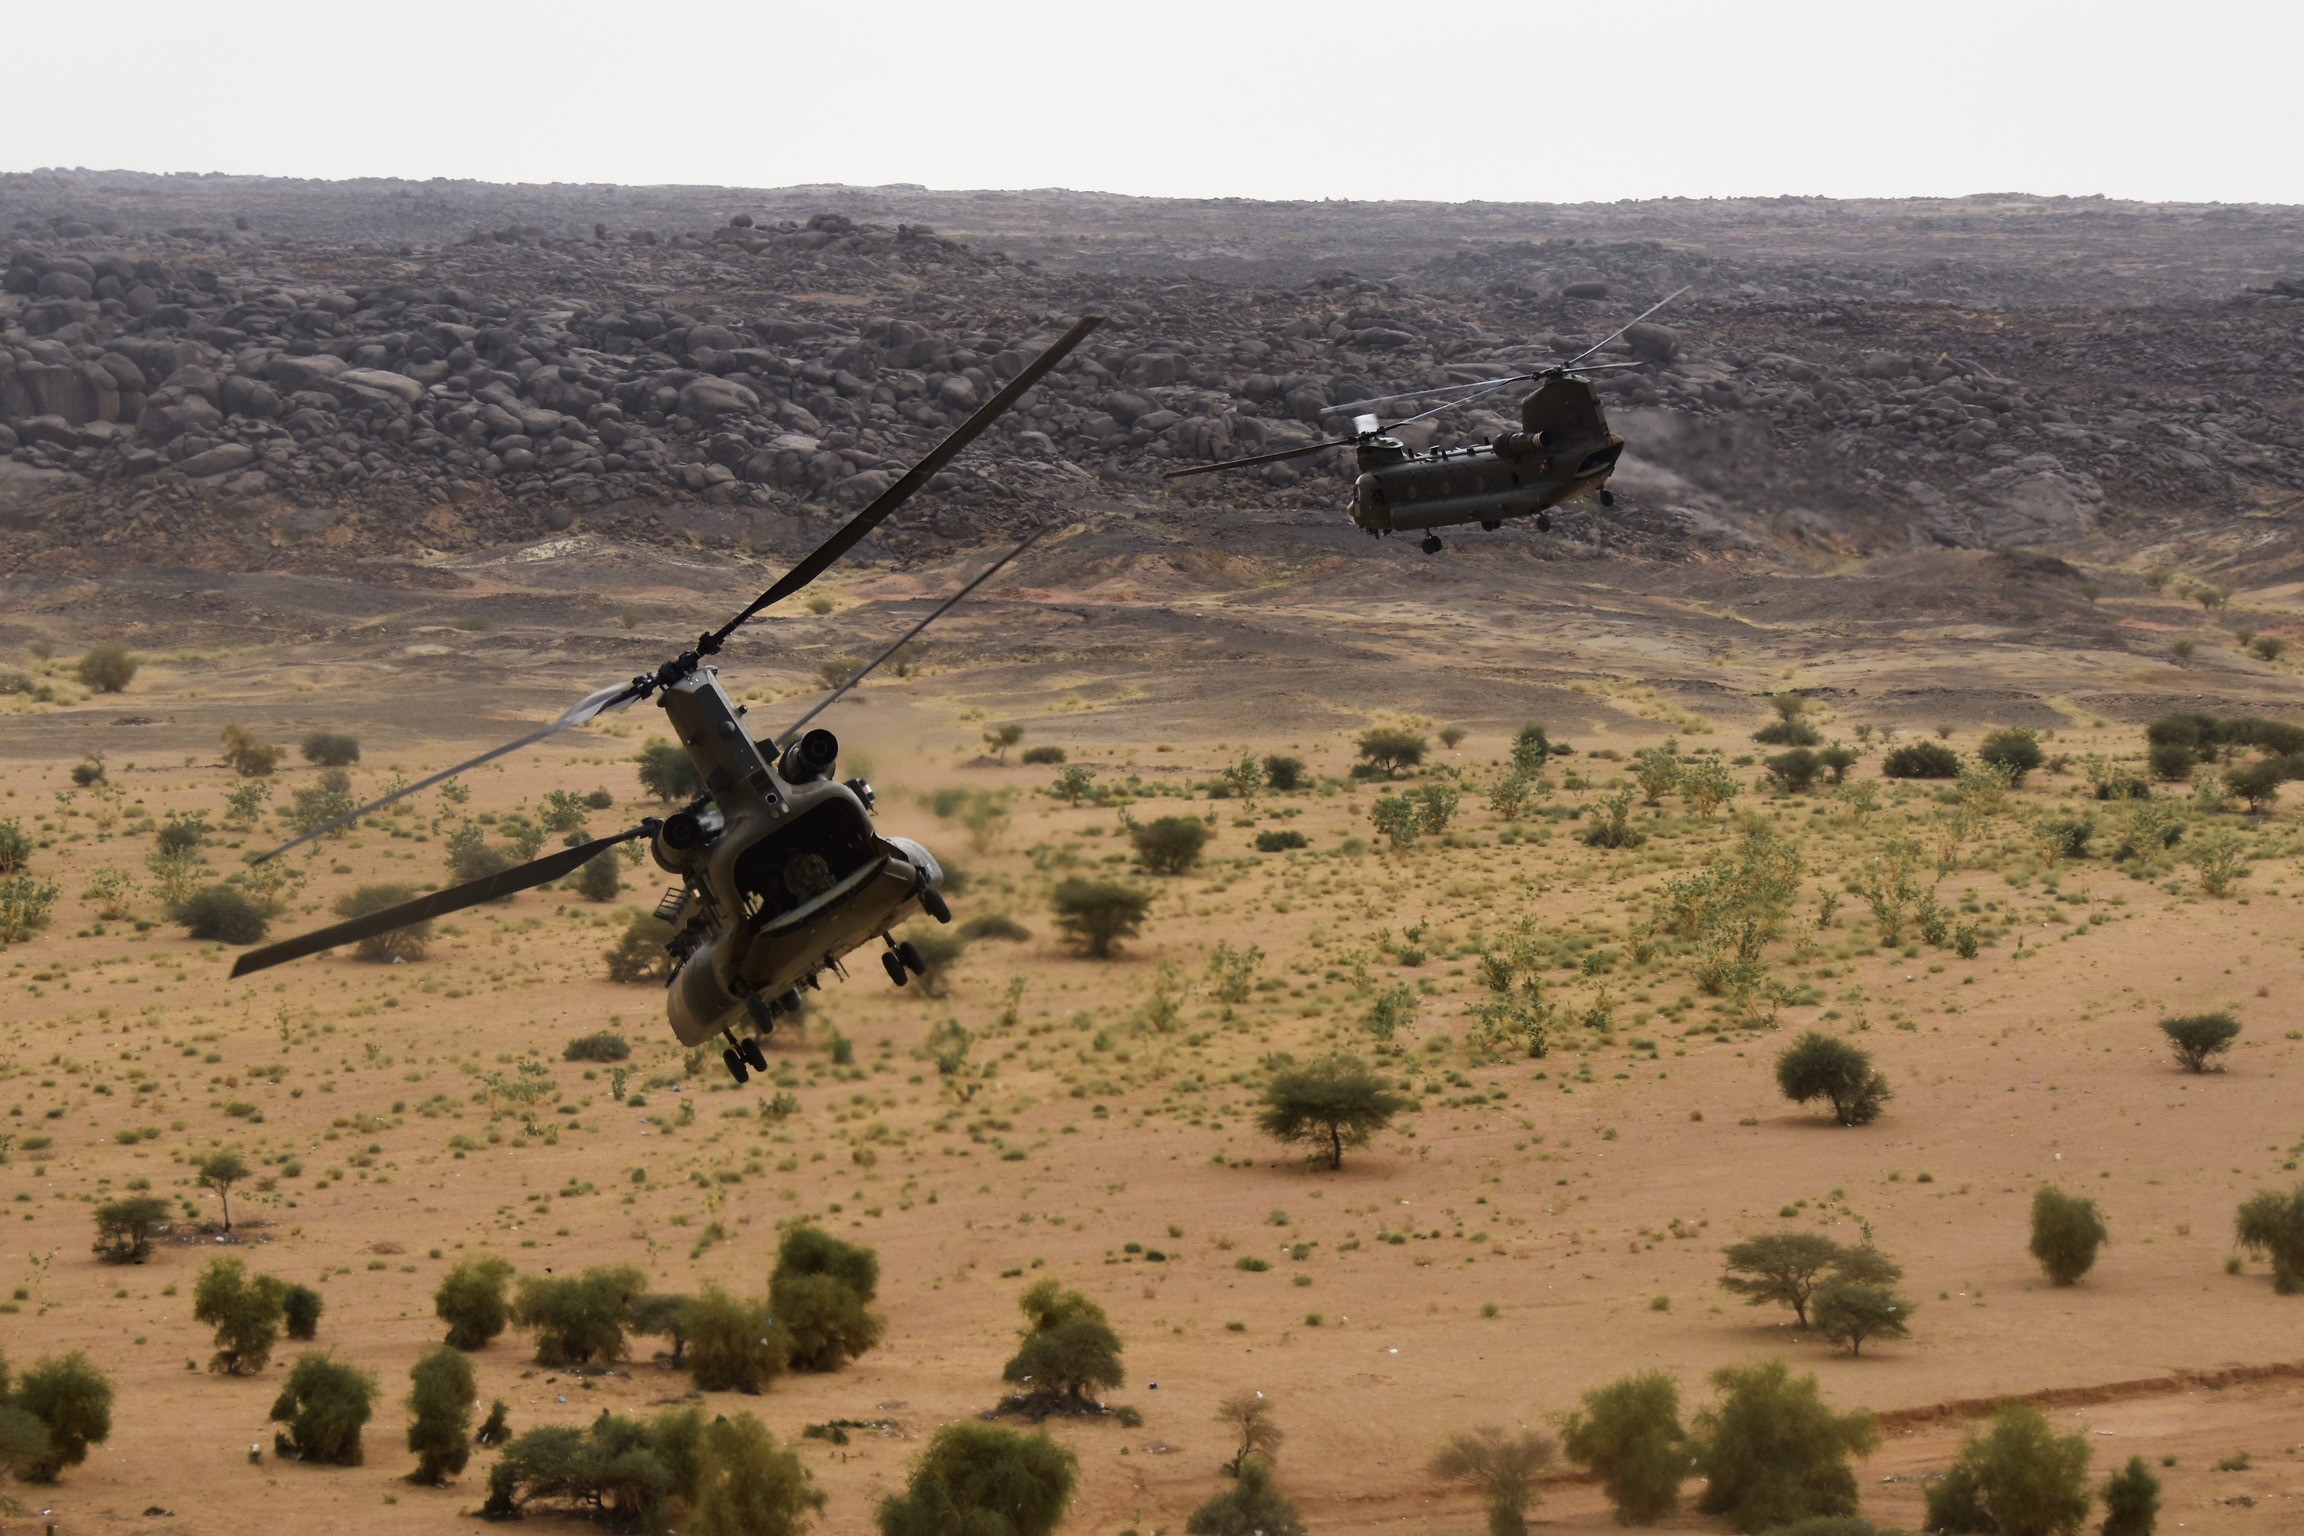 Two Chinook flying low over the Mali desert.